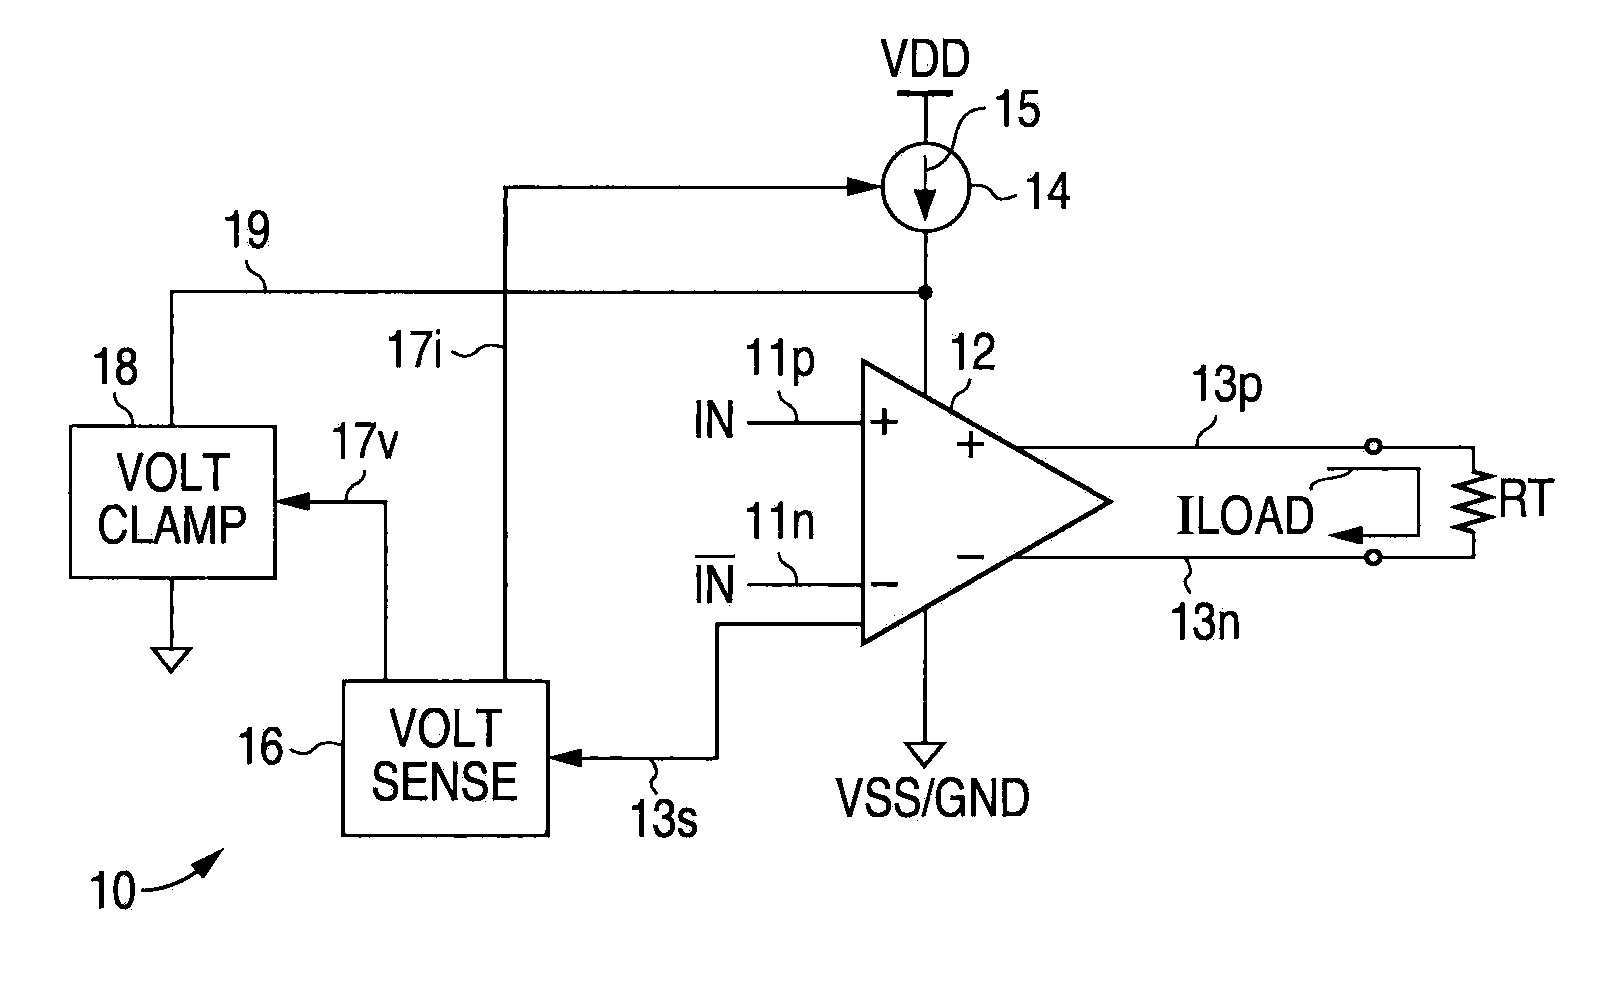 Low voltage differential signal (LVDS) transmitter with output power control